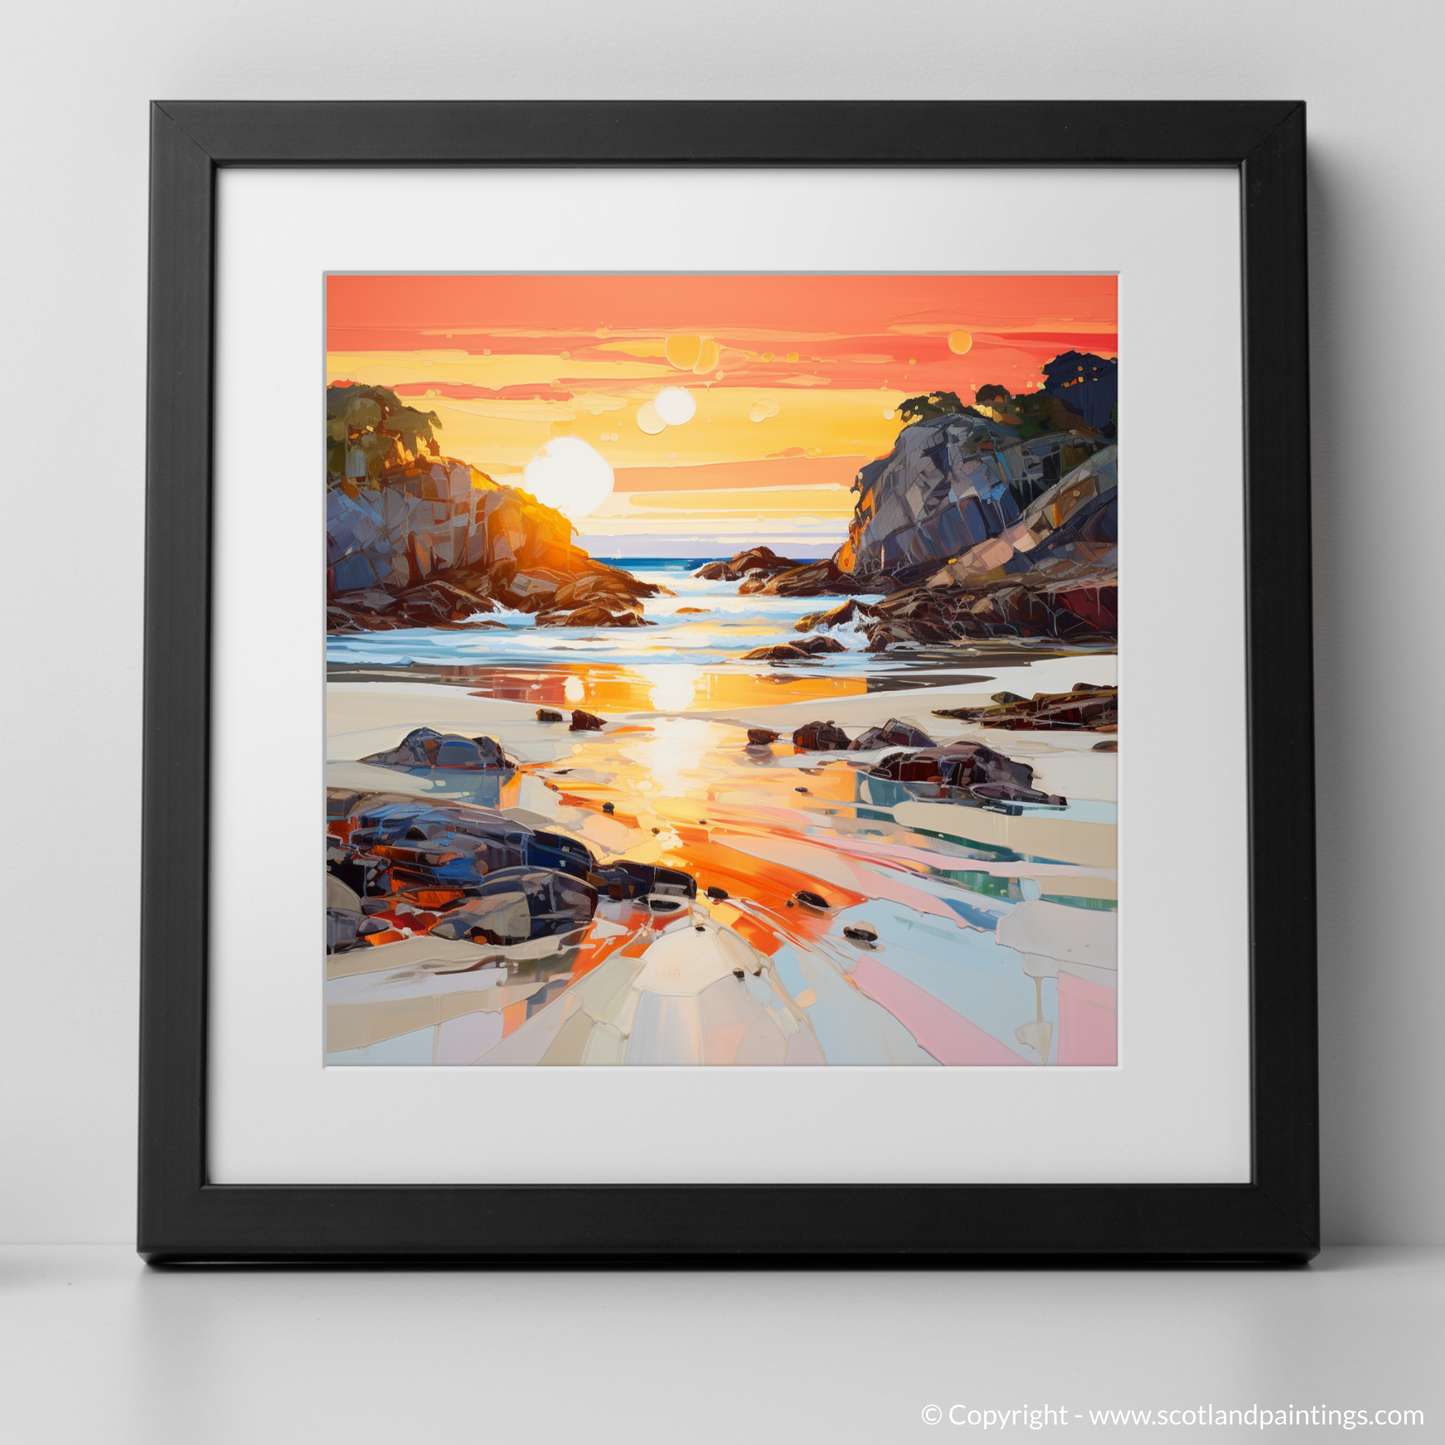 Painting and Art Print of Coral Beach at golden hour. Golden Hour at Coral Beach - An Expressionist Ode to Scotland's Shores.